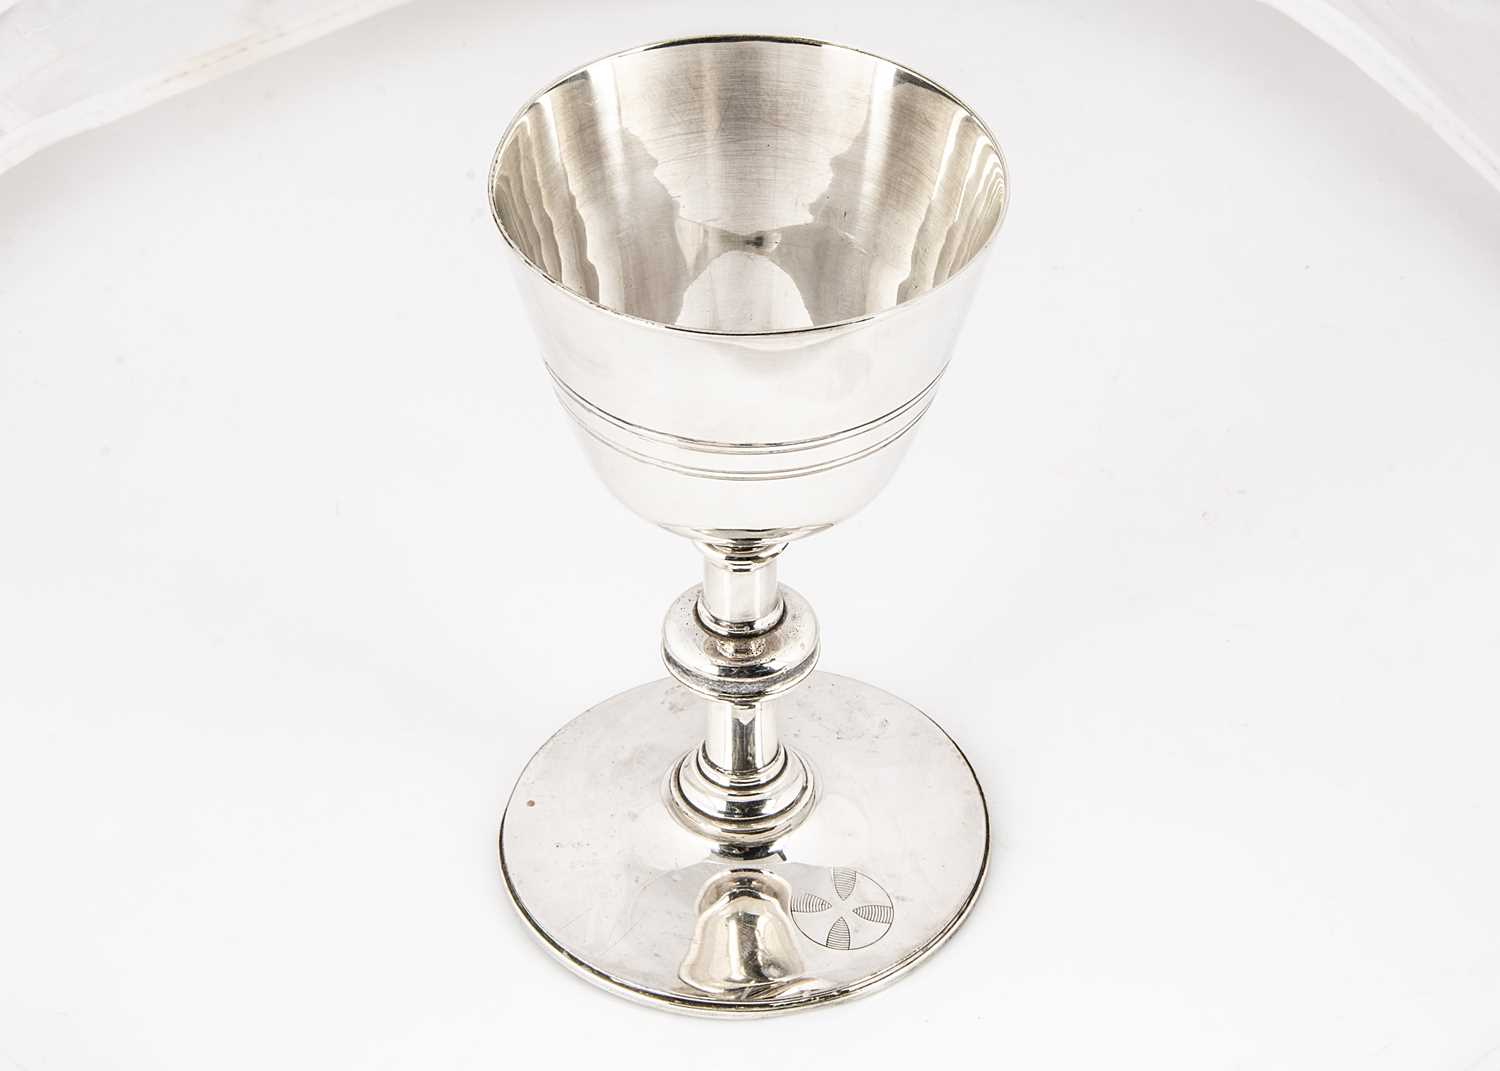 Lot 467 - A c1950s Military issued silver plated ecclesiastical chalice by Elkington & Co